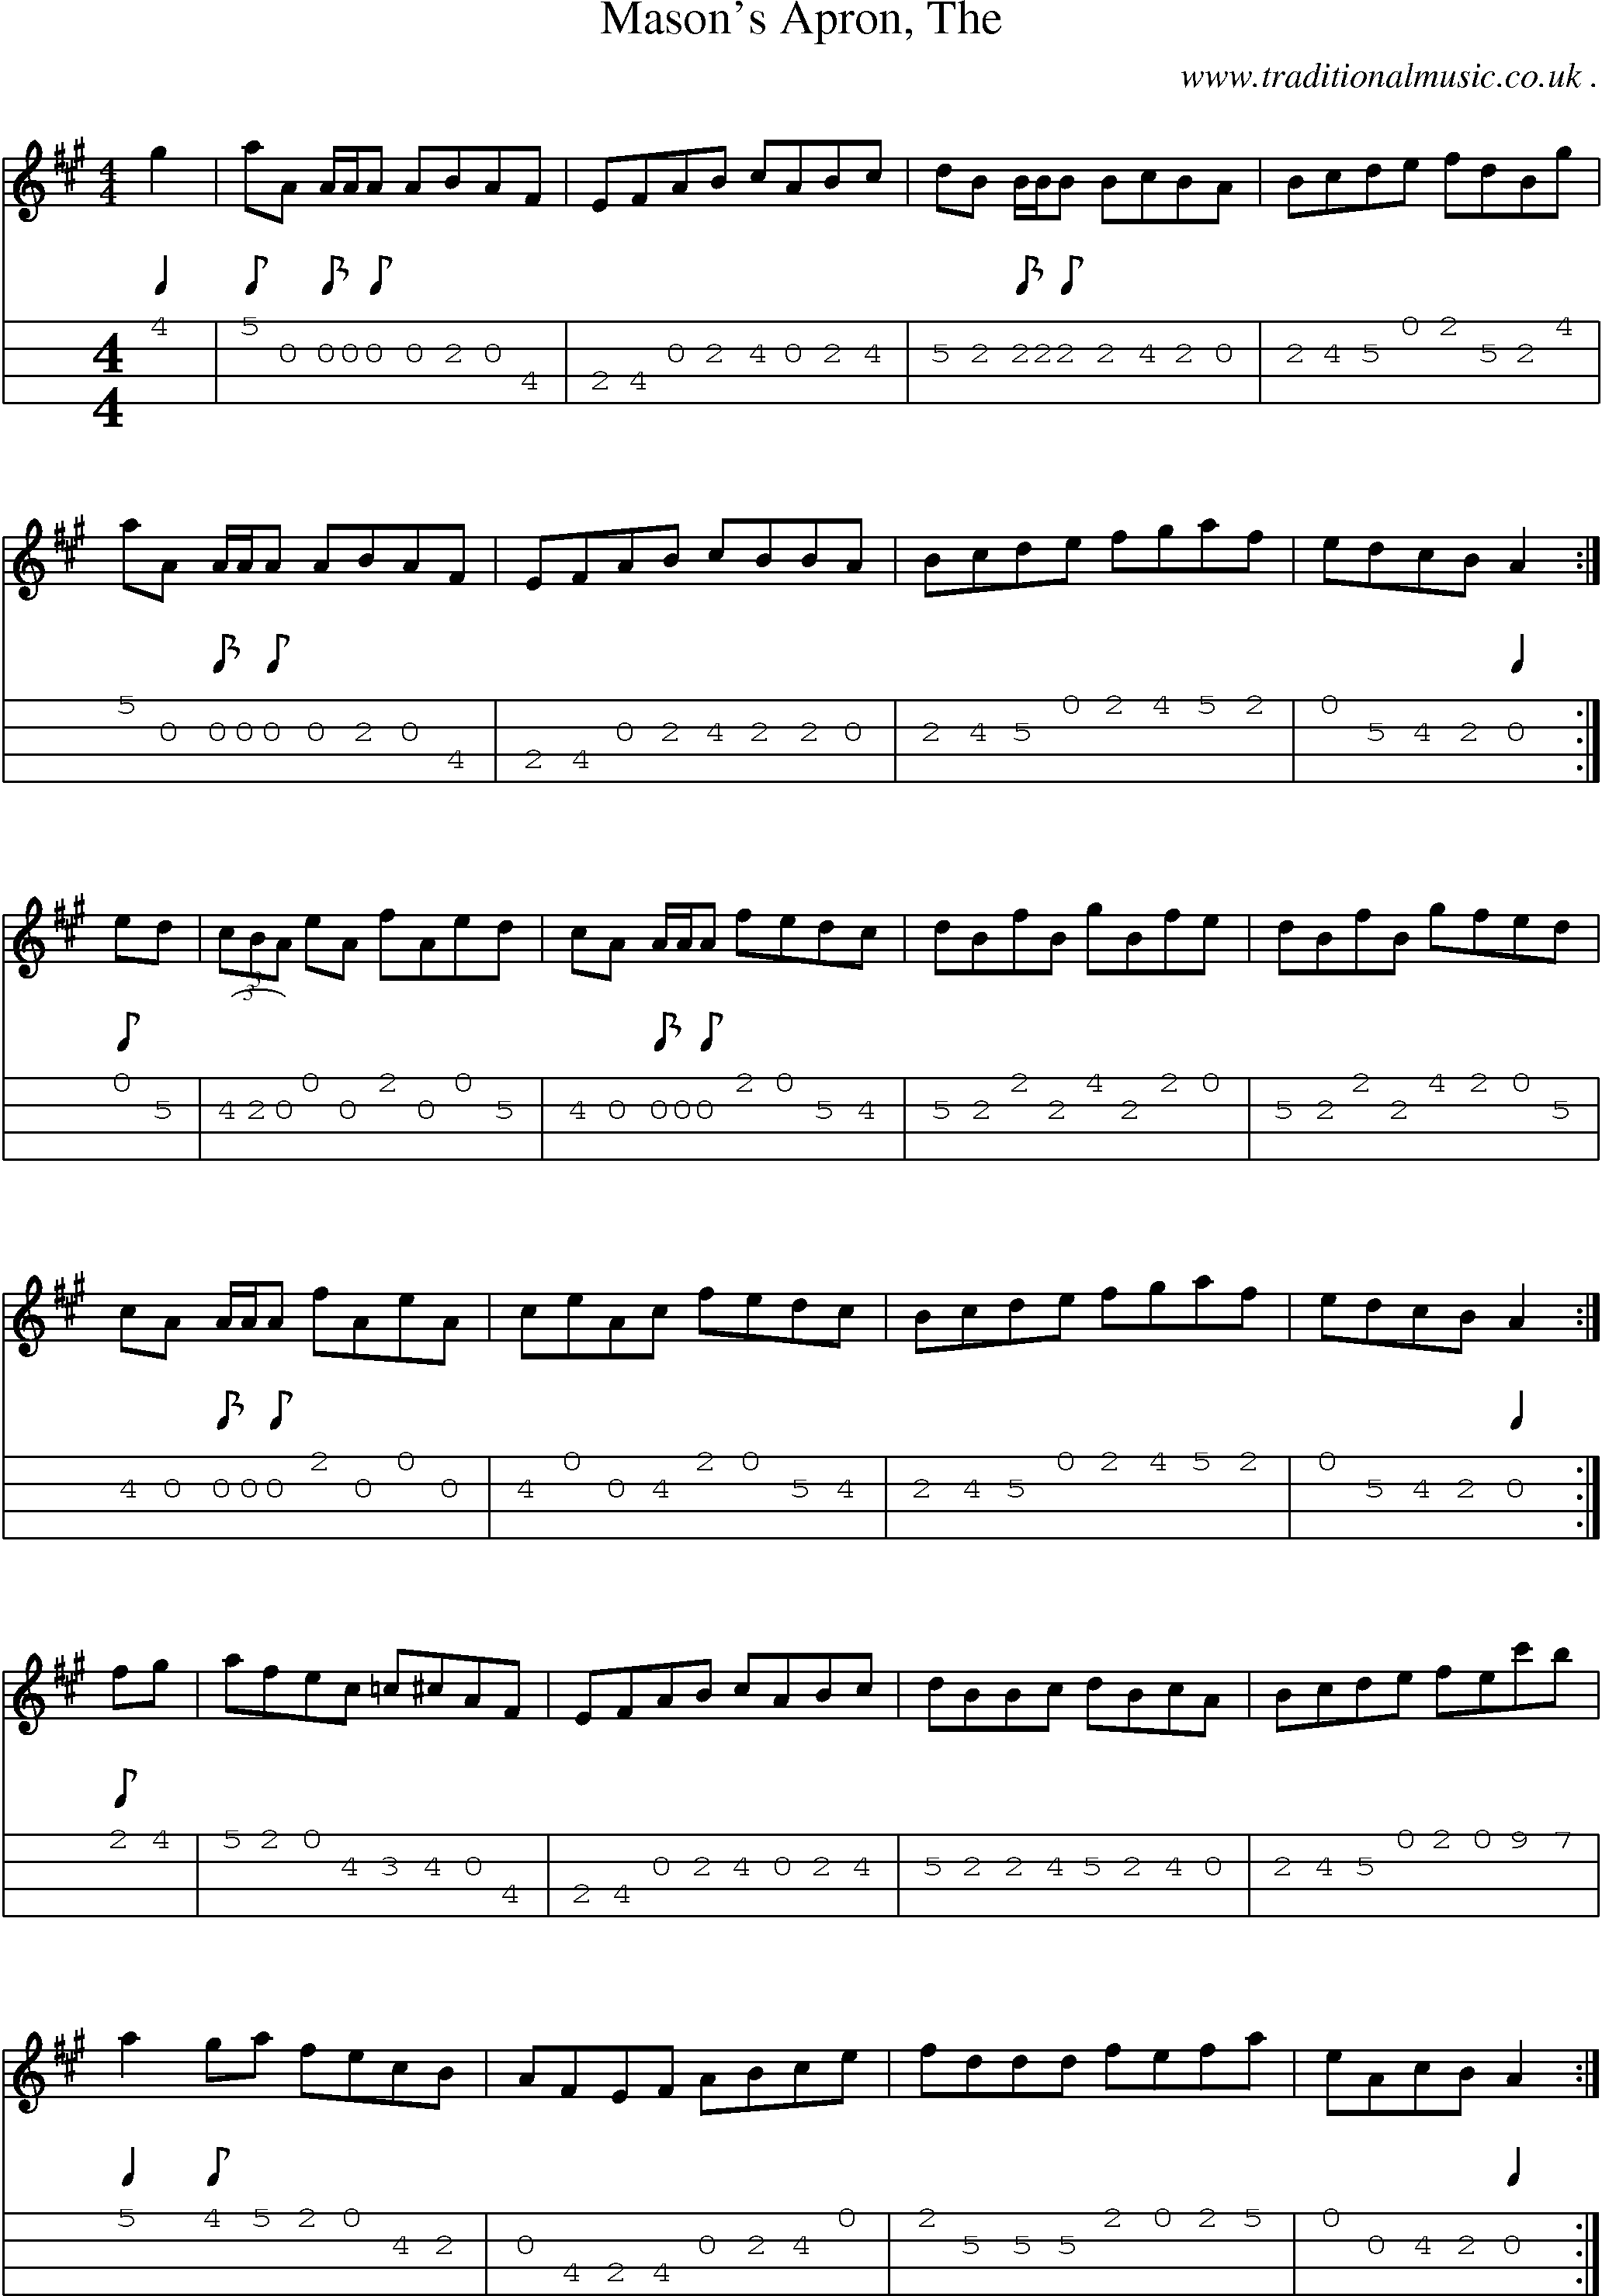 Sheet-music  score, Chords and Mandolin Tabs for Masons Apron The